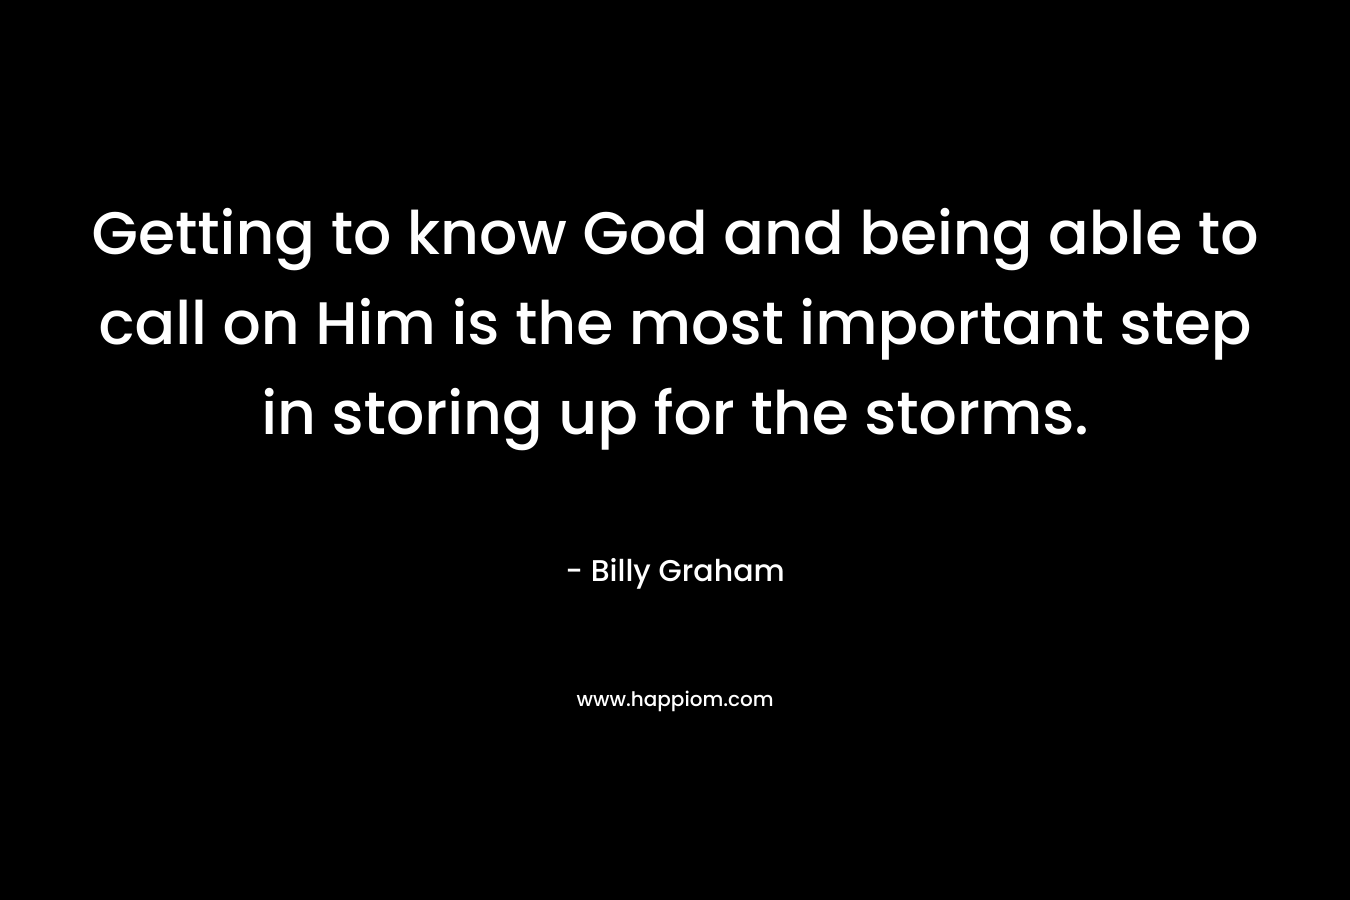 Getting to know God and being able to call on Him is the most important step in storing up for the storms.